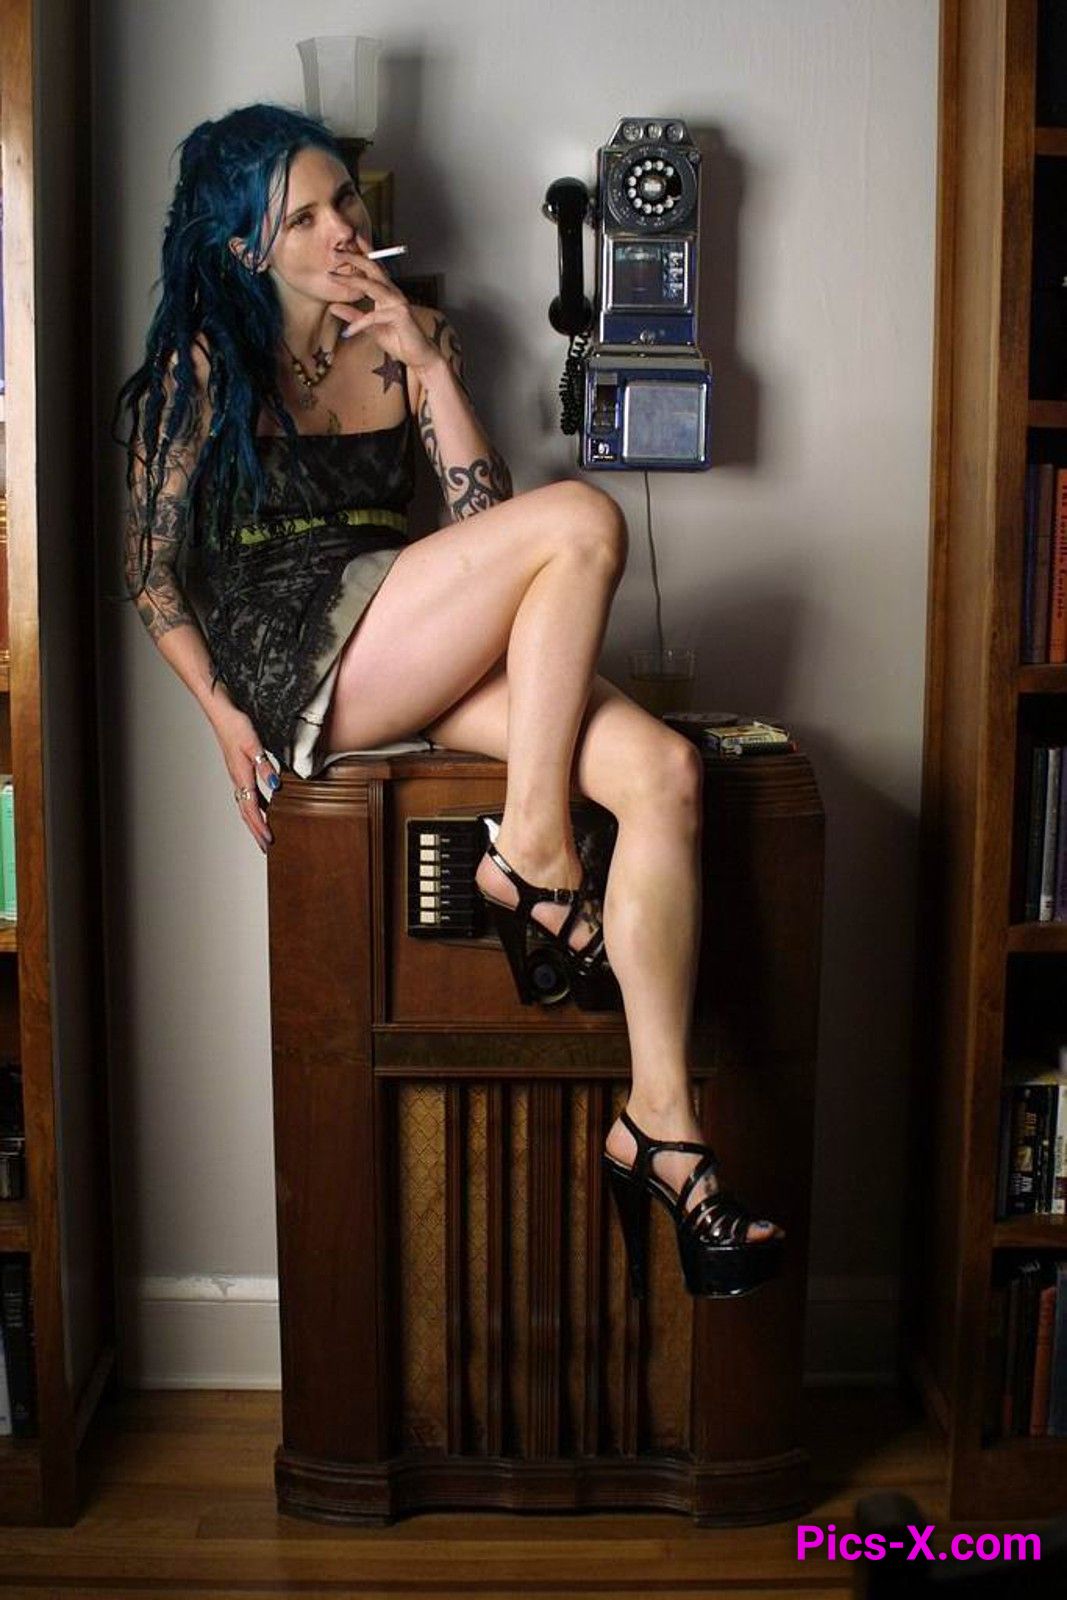 Blue haired punk babe playing with herself on the phone - Punk Rock Girlfriend - Image 4